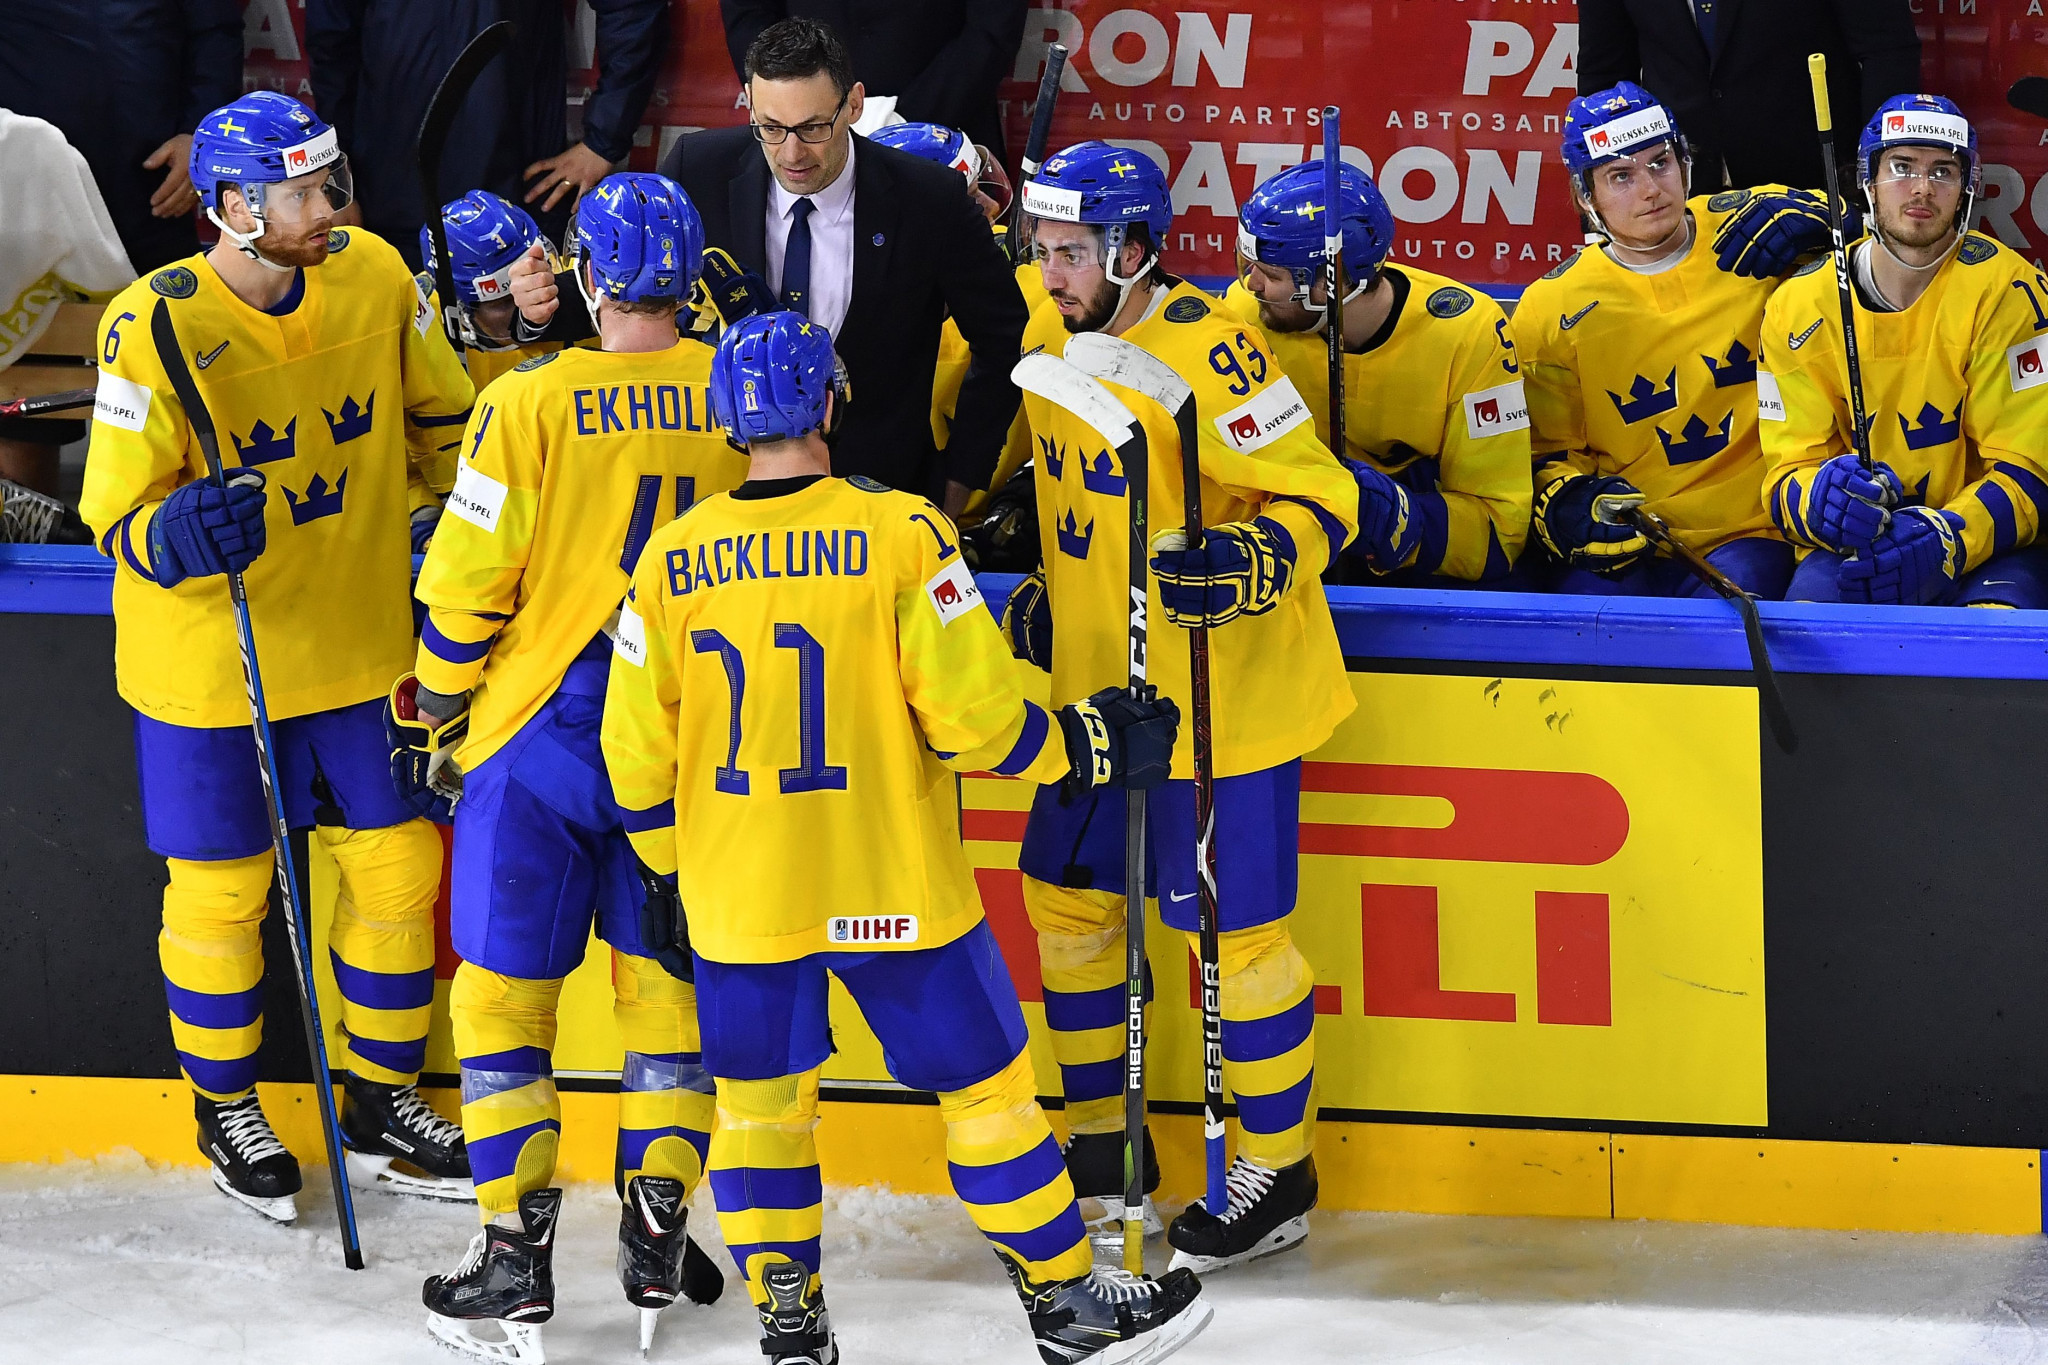 Rikard Grönborg is to leave as head coach of Sweden's men's ice hockey team after the 2019 World Championship ©Getty Images